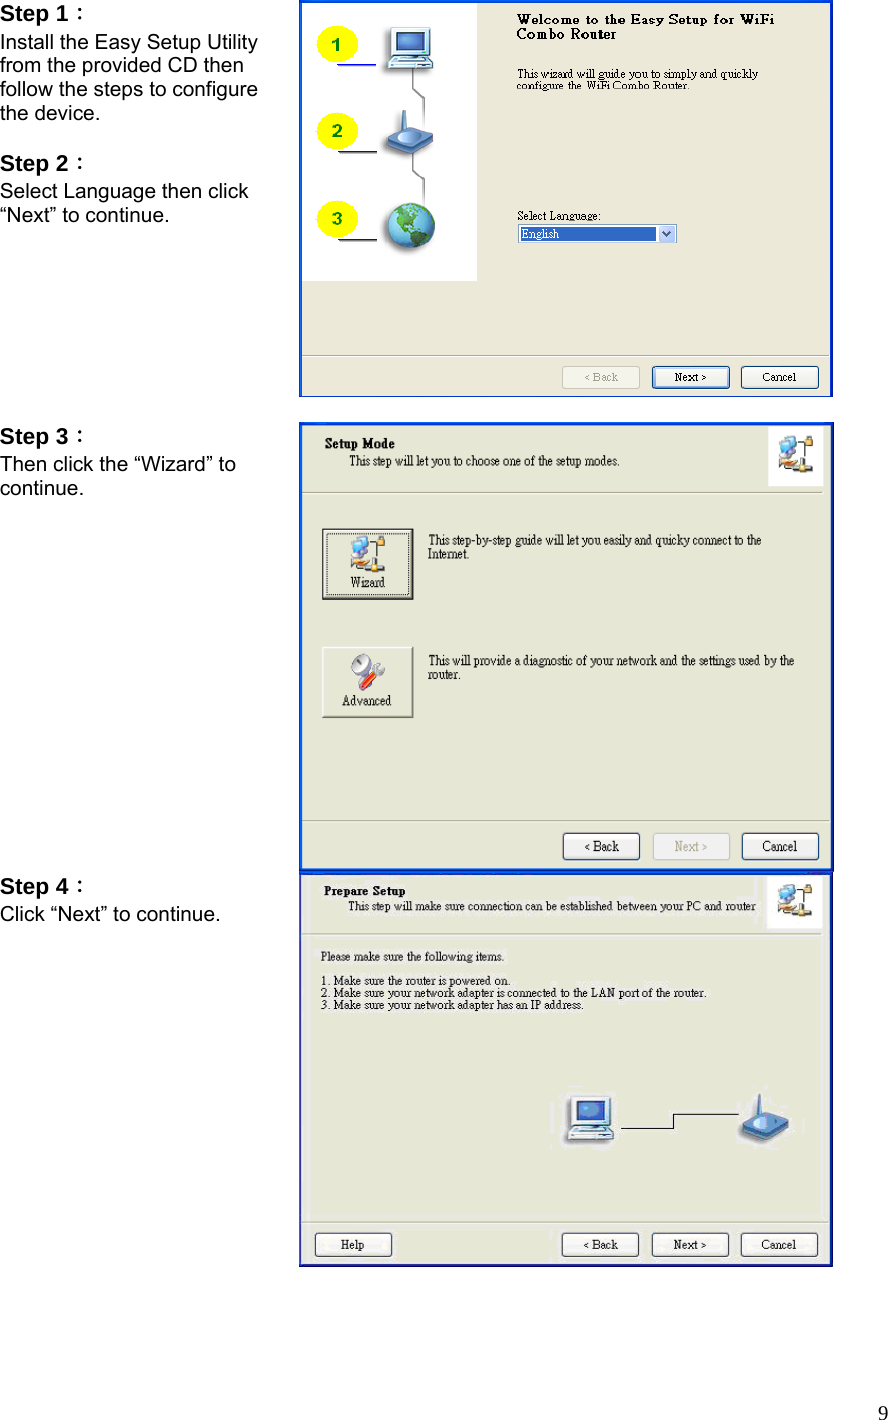  9Step 1：  Install the Easy Setup Utility from the provided CD then follow the steps to configure the device.  Step 2：  Select Language then click “Next” to continue.   Step 3：  Then click the “Wizard” to continue.   Step 4： Click “Next” to continue.   